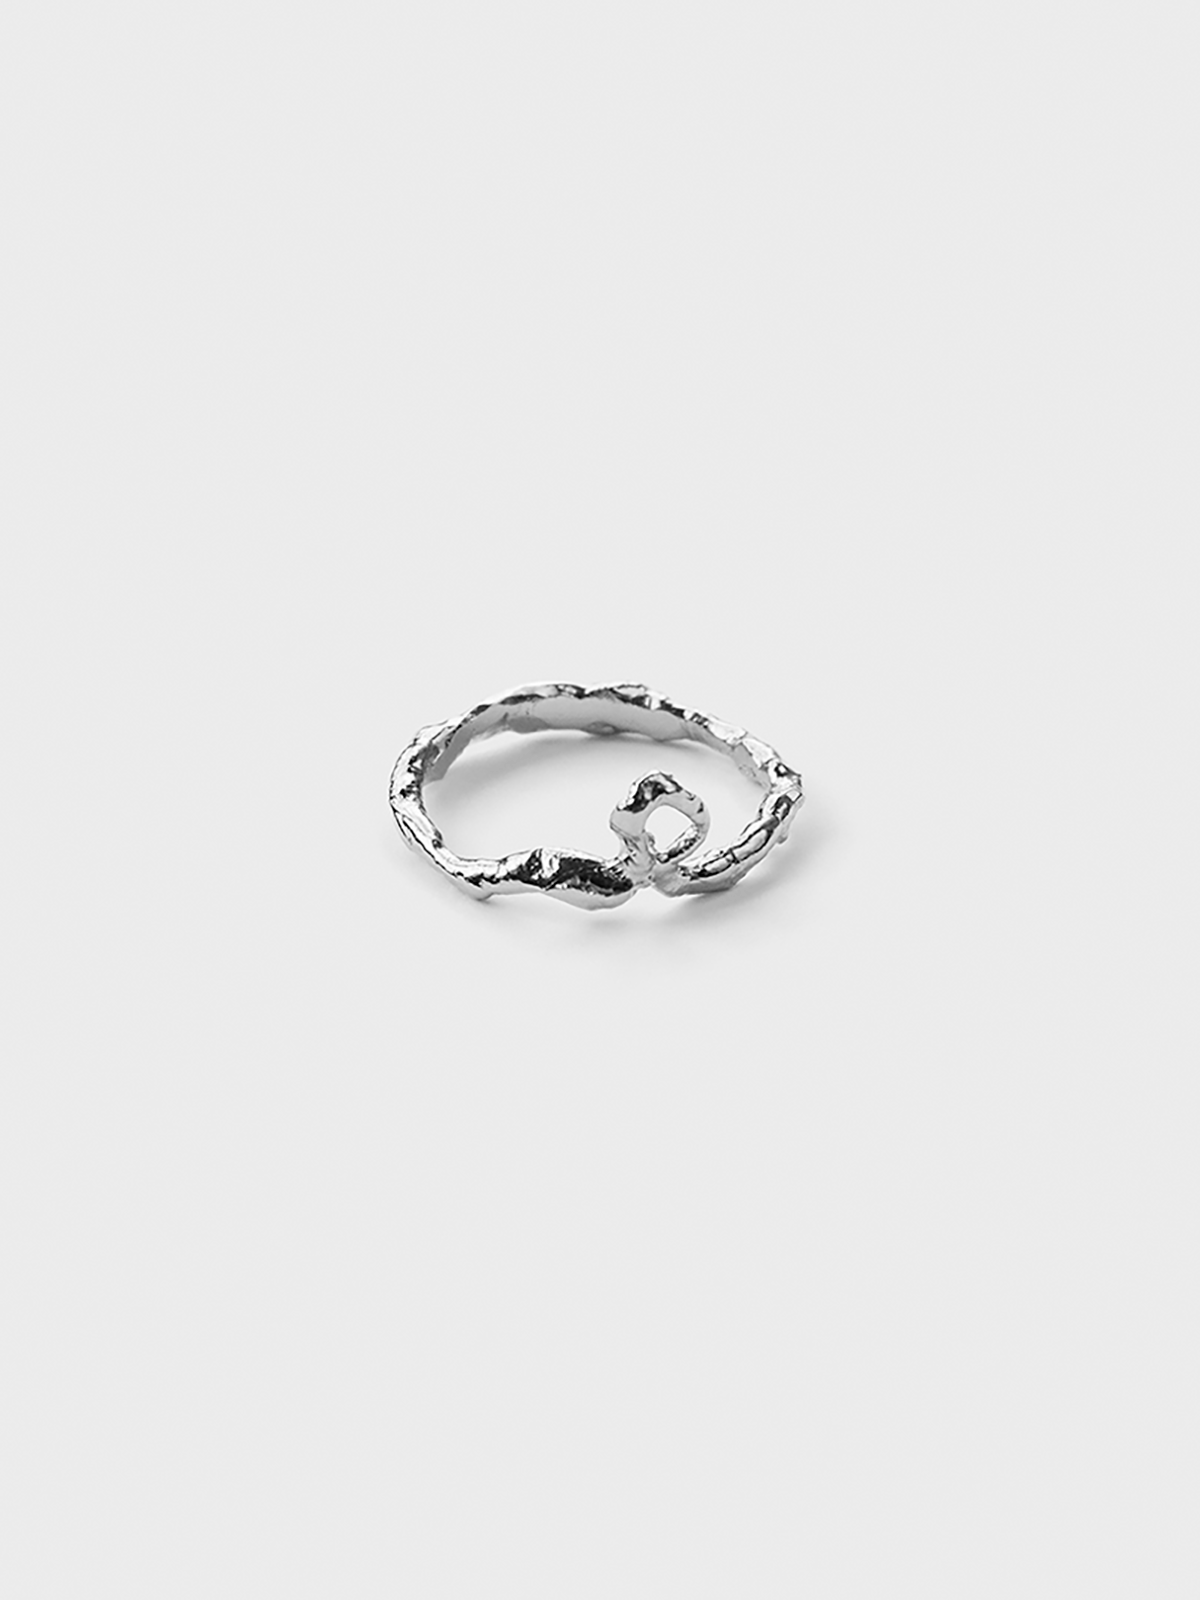 Lea Hoyer - Edith Ring in Silver